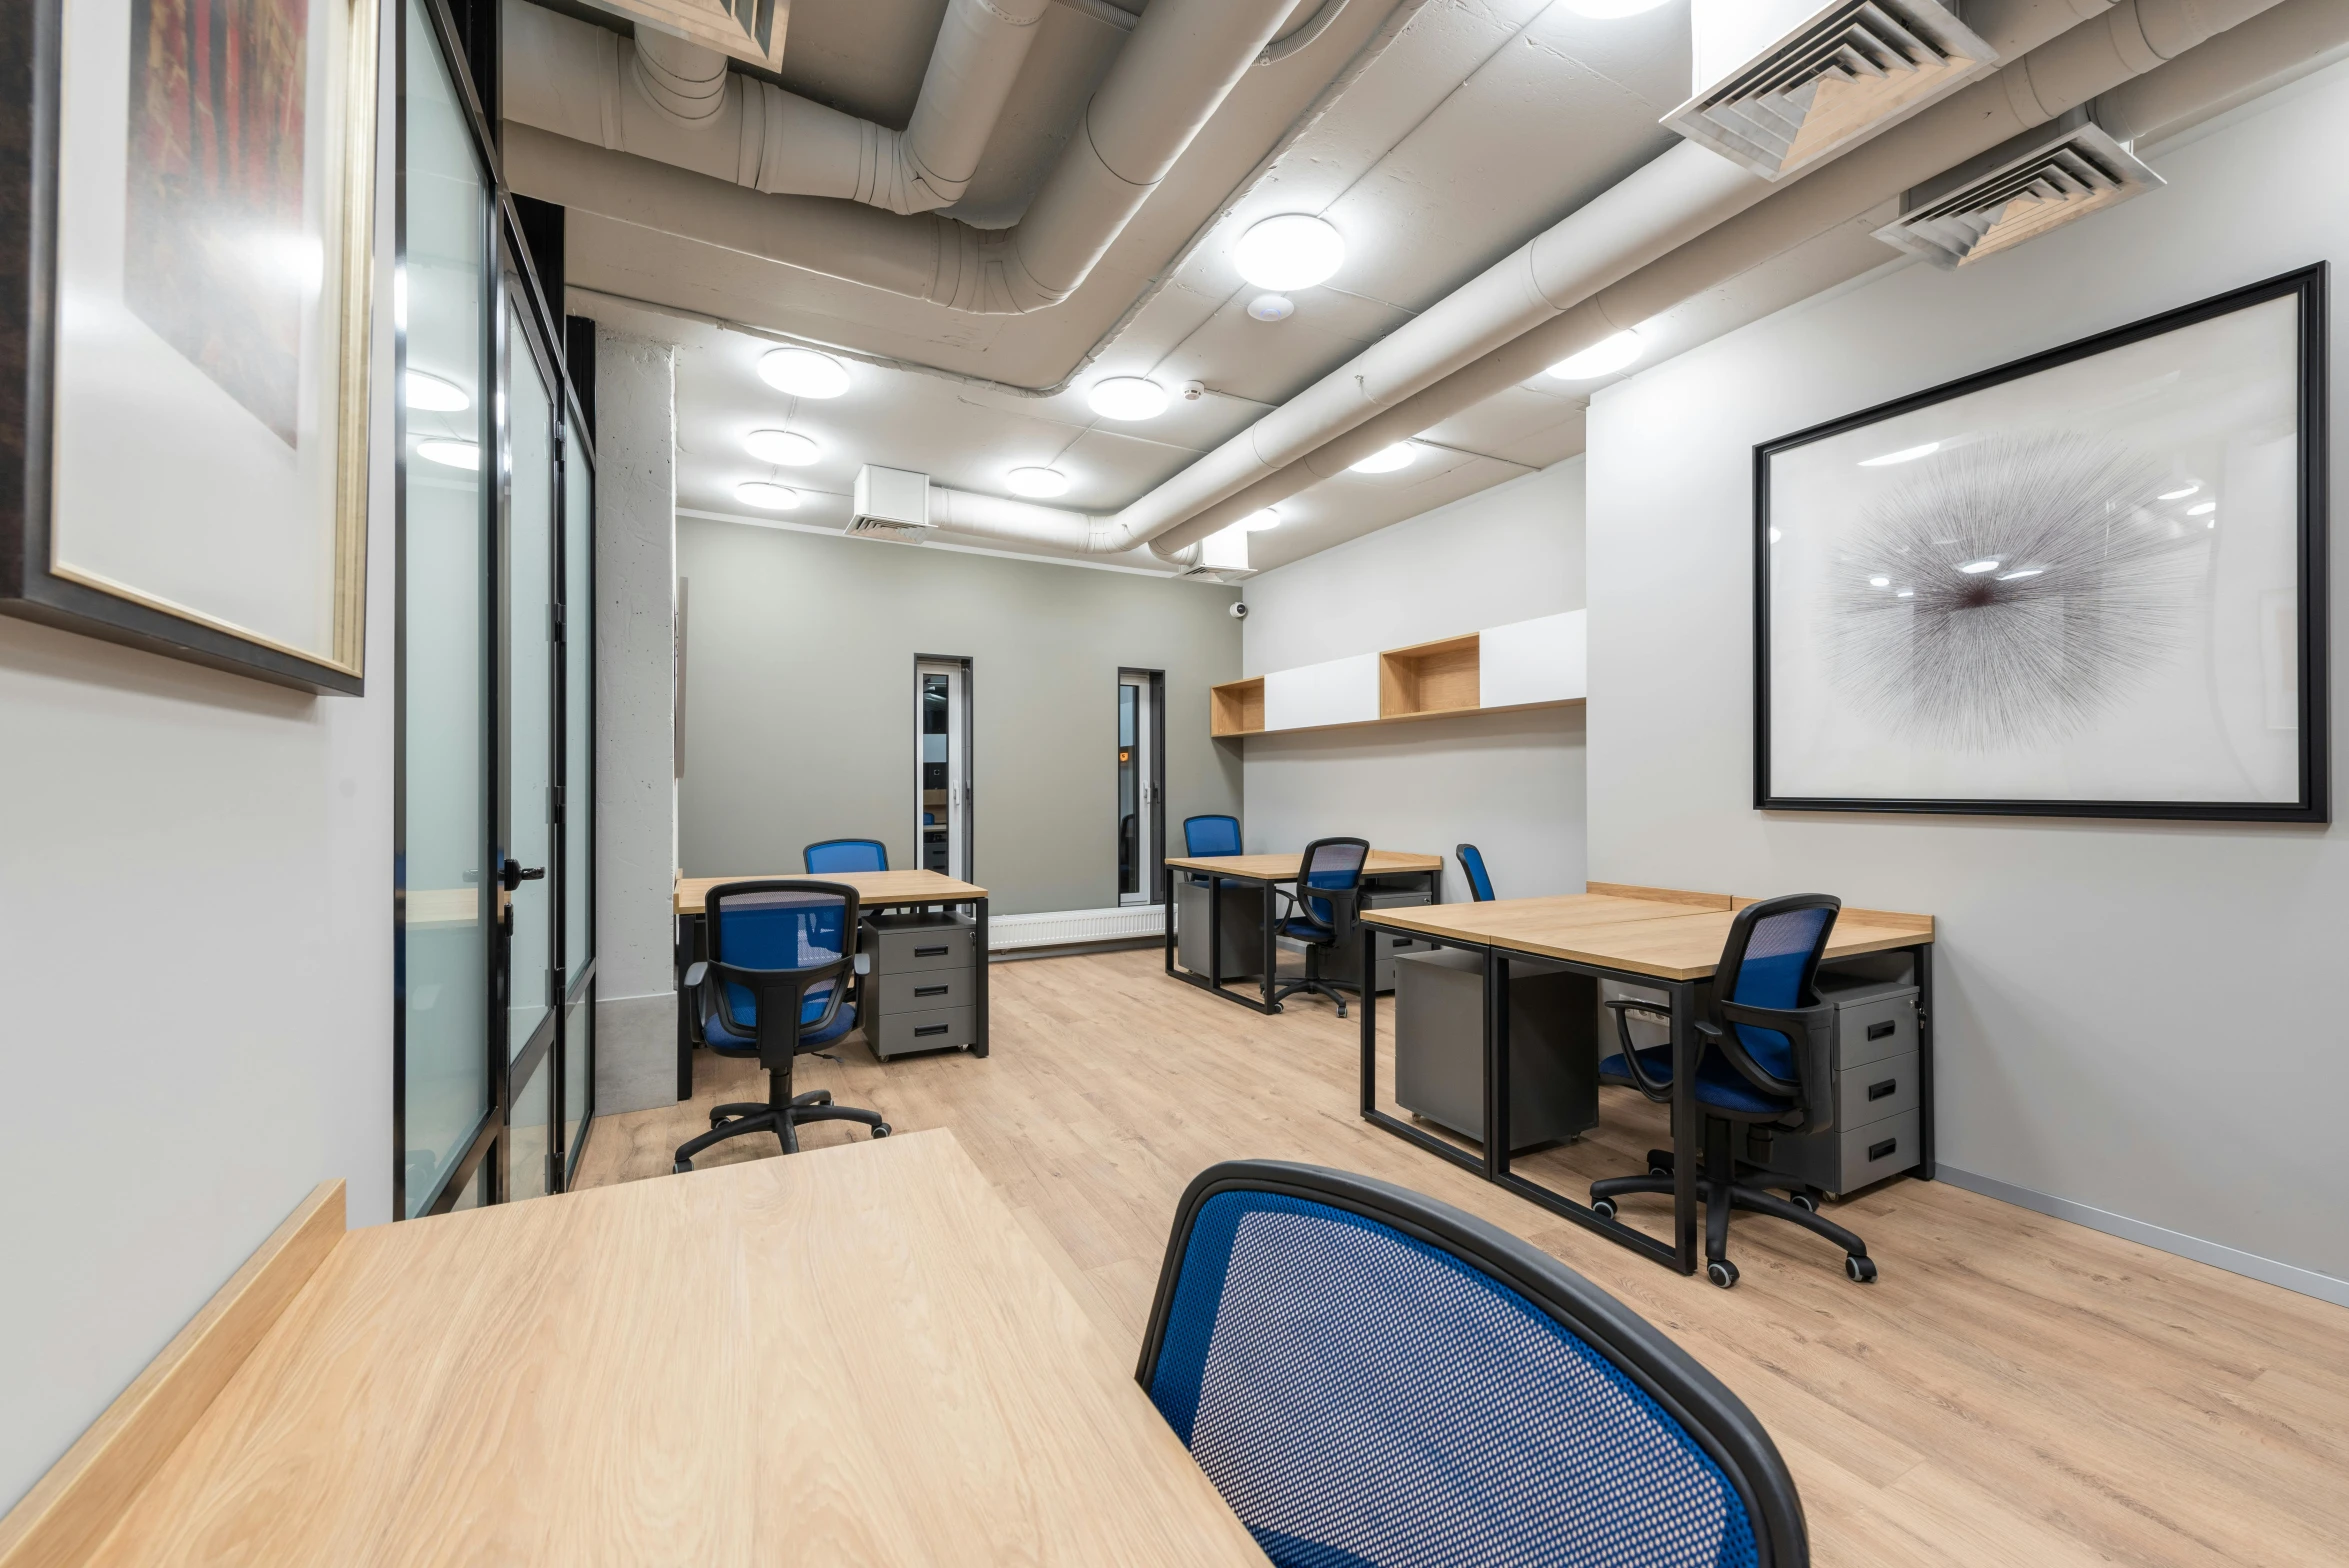 a conference room with desks and chairs, private press, swanland, thumbnail, multiple desks, central hub